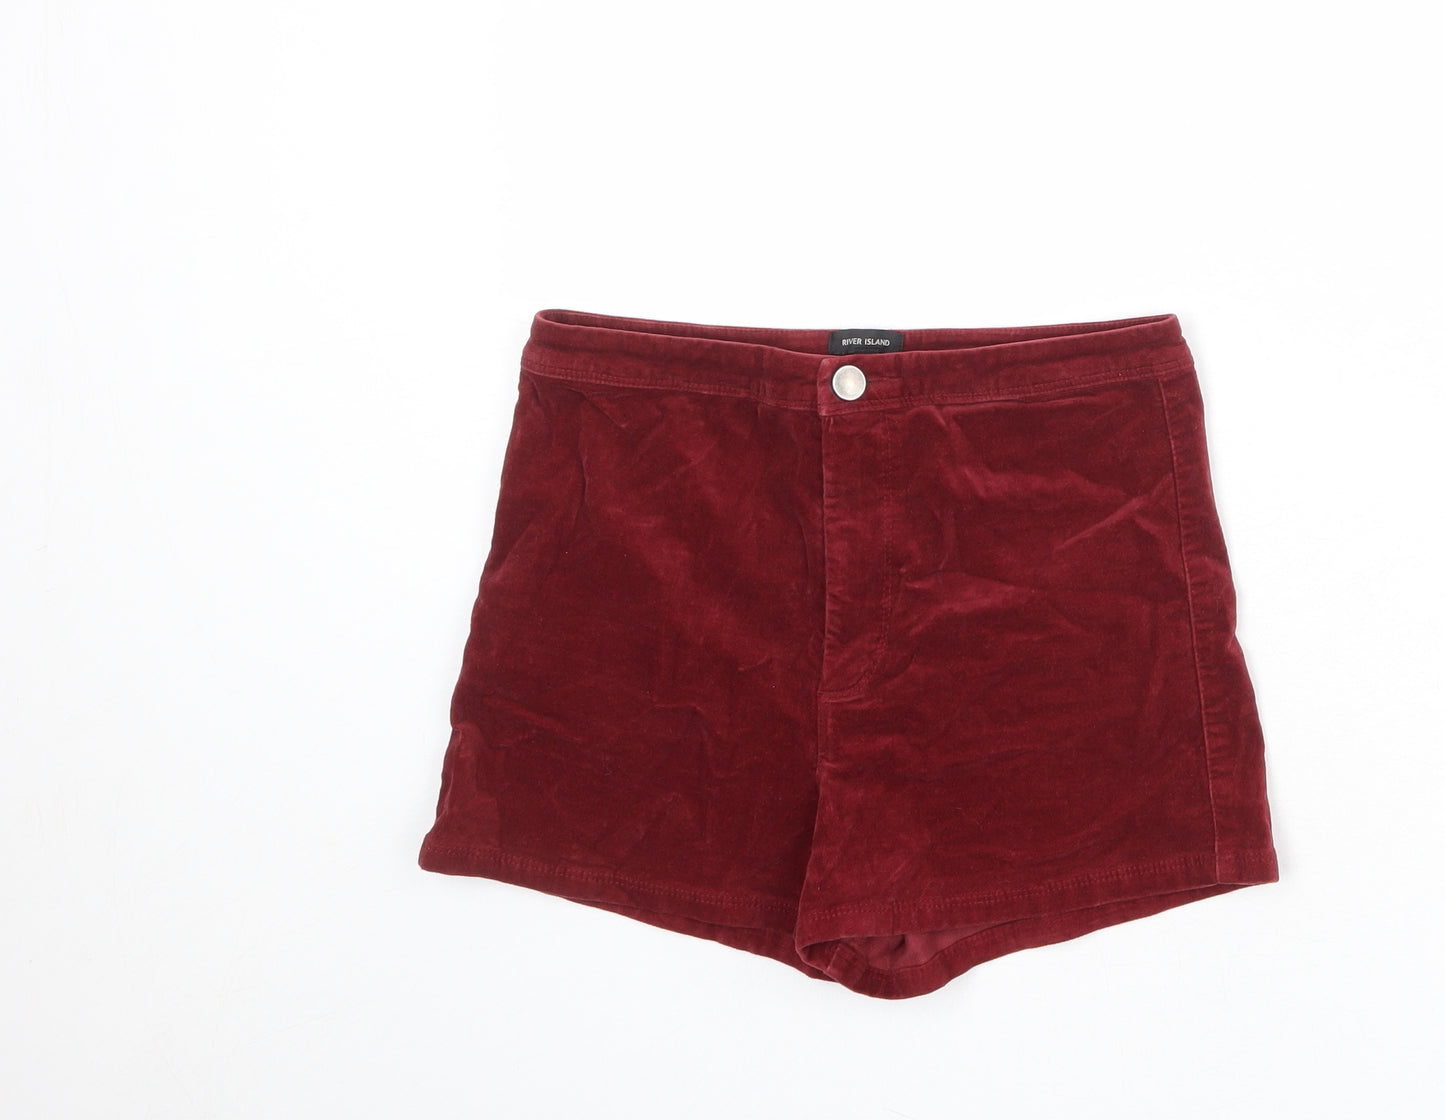 River Island Womens Red Cotton Basic Shorts Size 10 L4 in Regular Zip